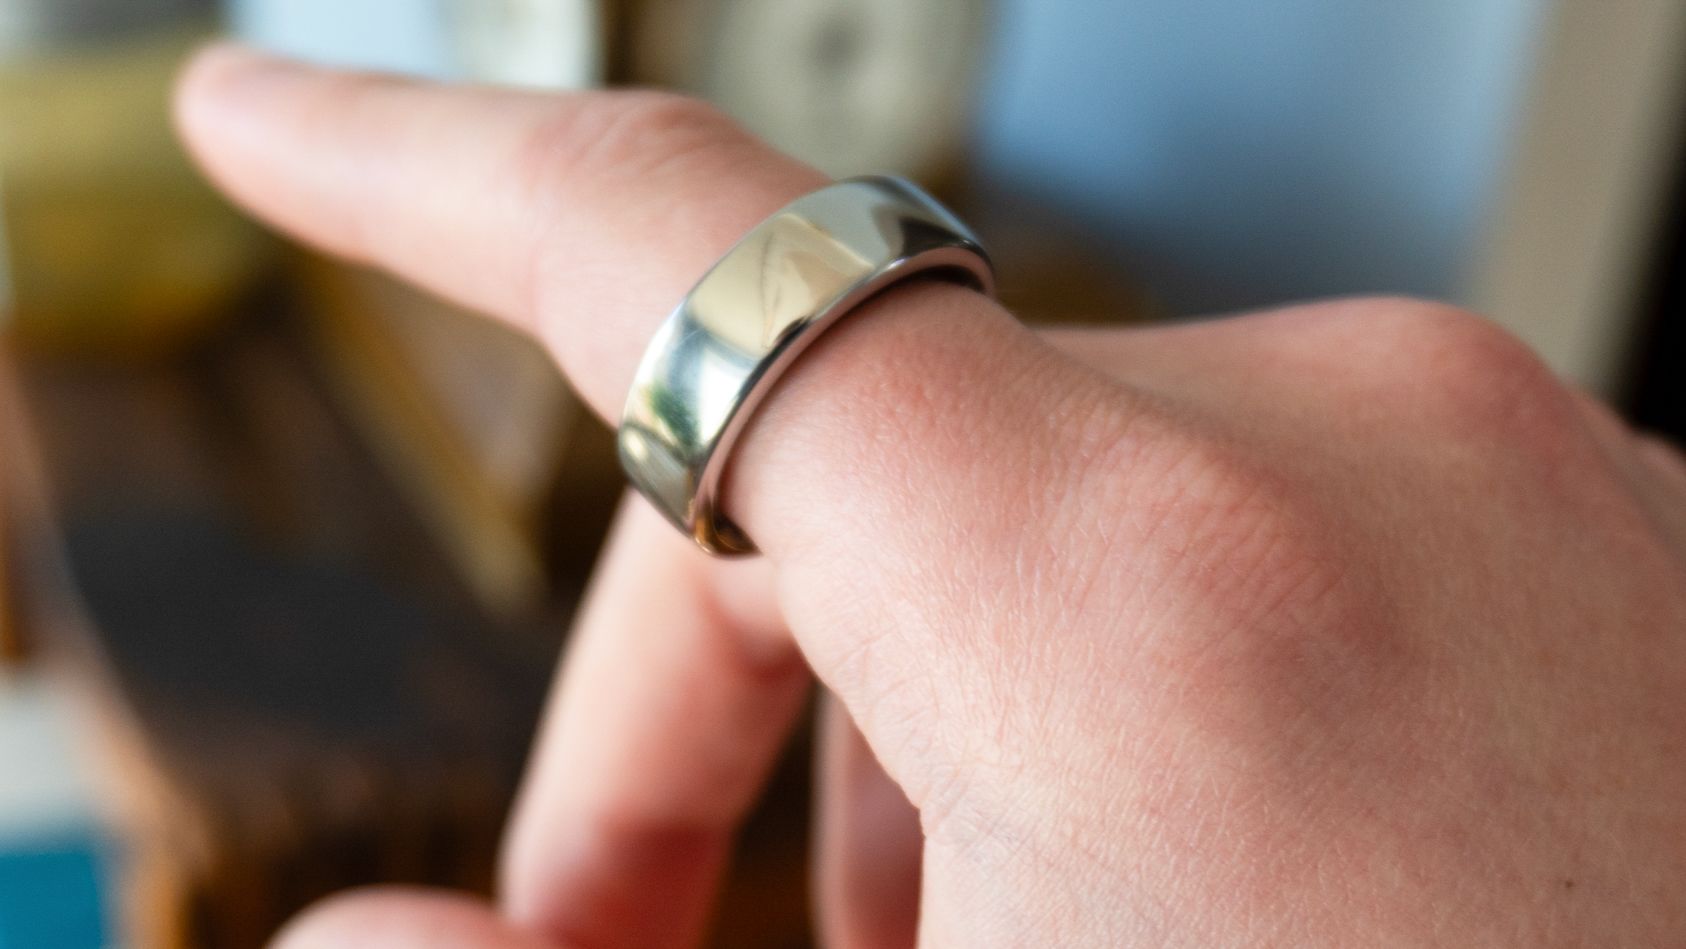 The Oura Ring is the most beautiful fitness tracker, but is it right for  you?